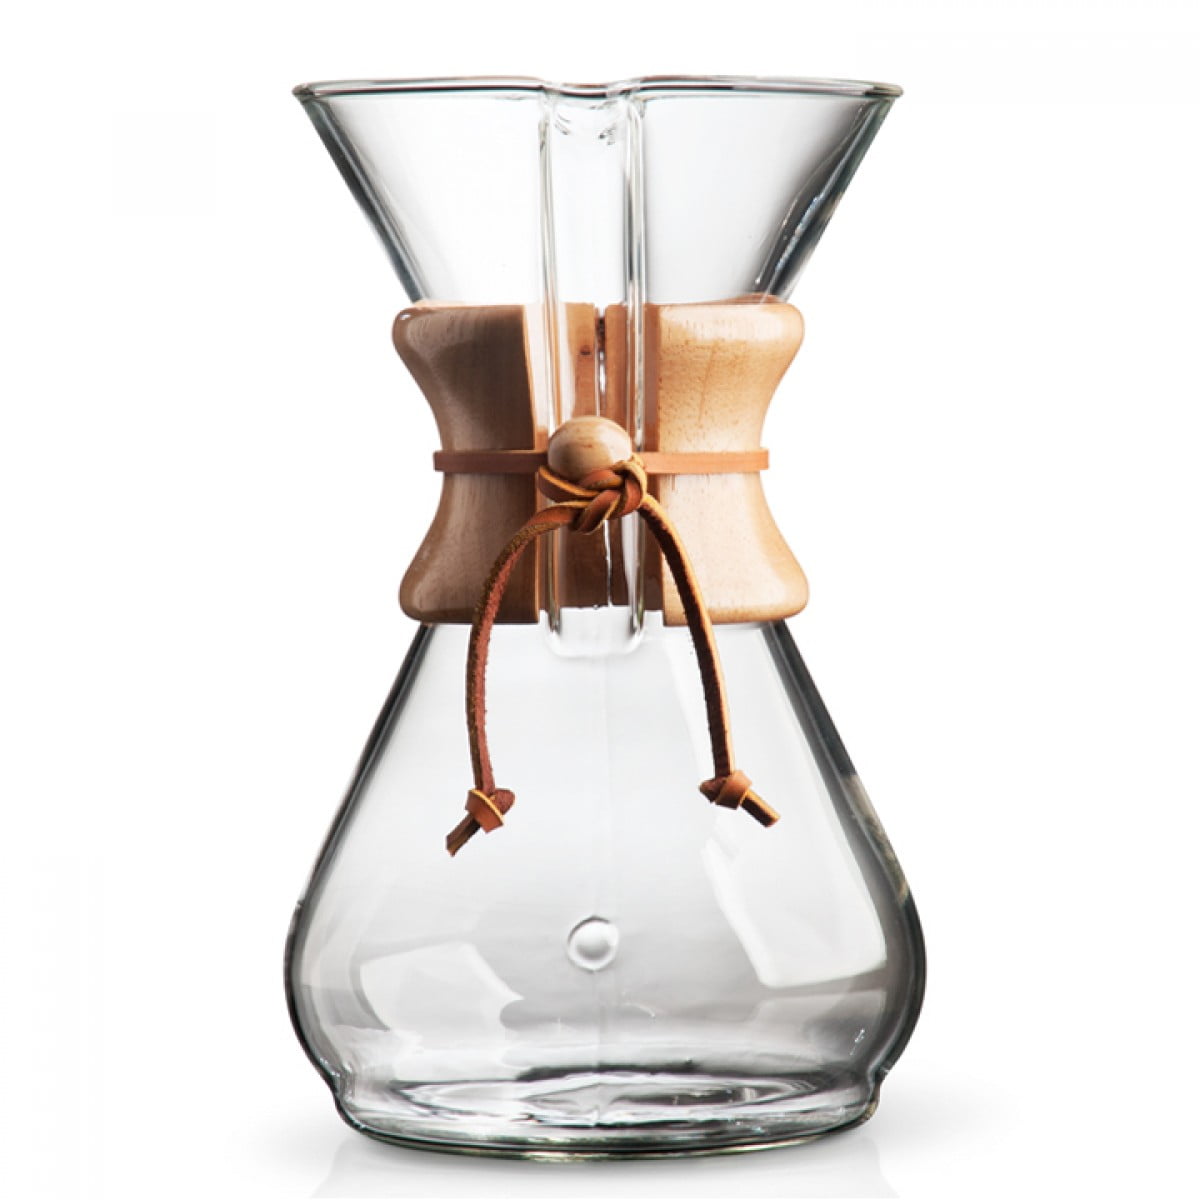 CHEMEX 8 CUP POUR-OVER COFFEEMAKER– Shop in the Kitchen